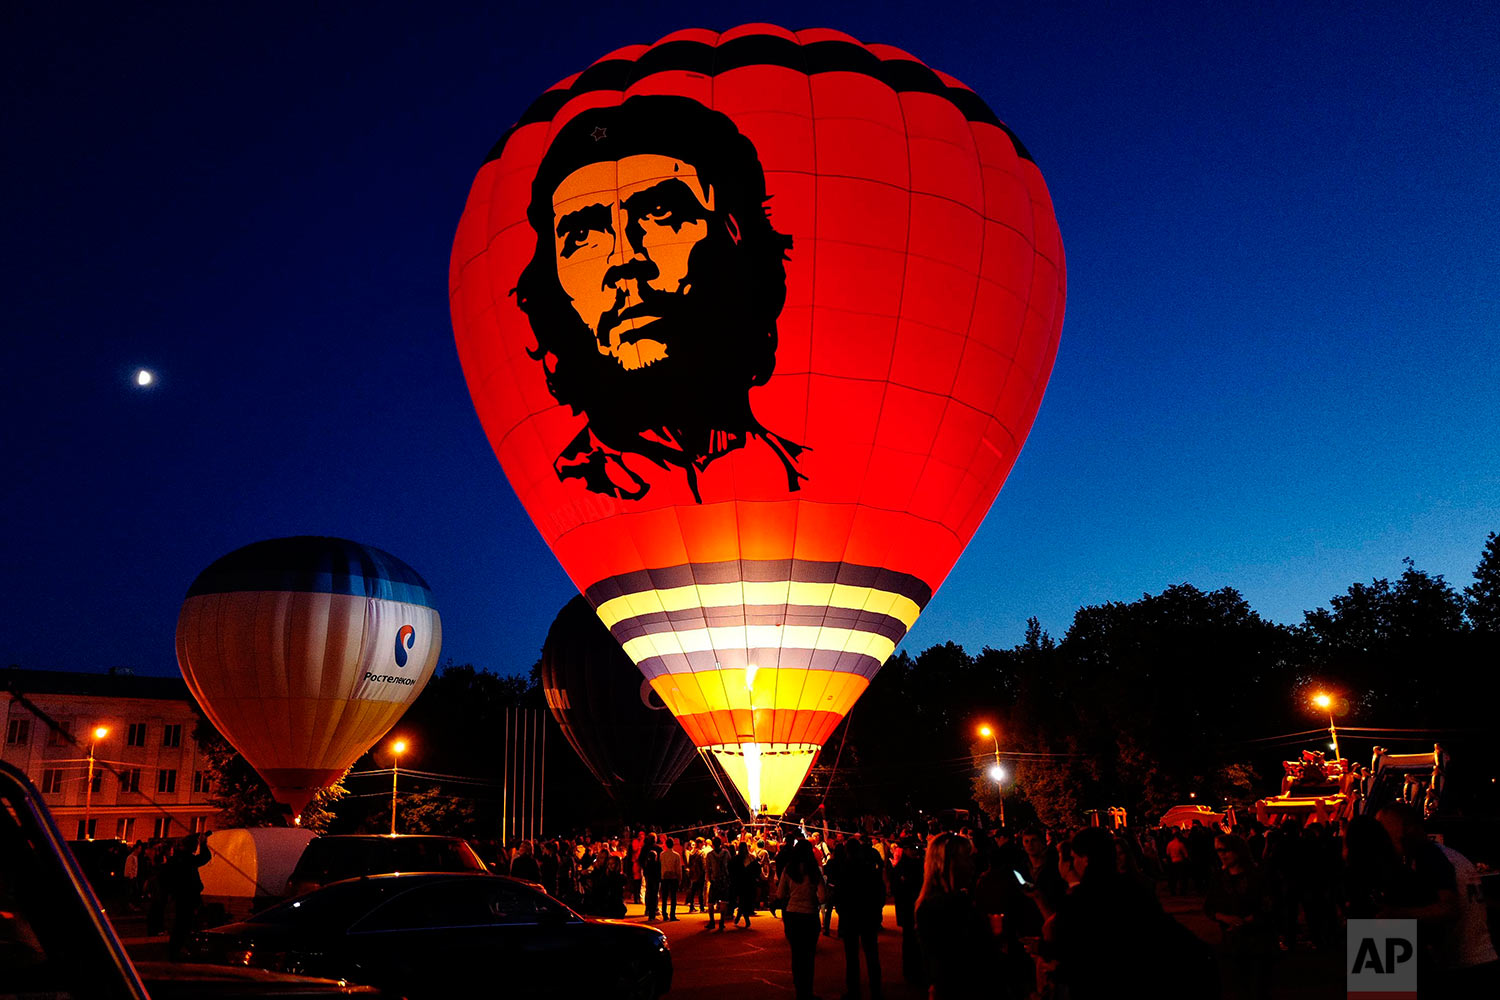  In this photo taken on Monday, June 13, 2016, a hot air balloon with the the image of Argentine revolutionary Che Guevara printed on it's side prepares to lift off during a ballooning festival in Velikiye Luki, Russia . (AP Photo/Maxim Marmur) 